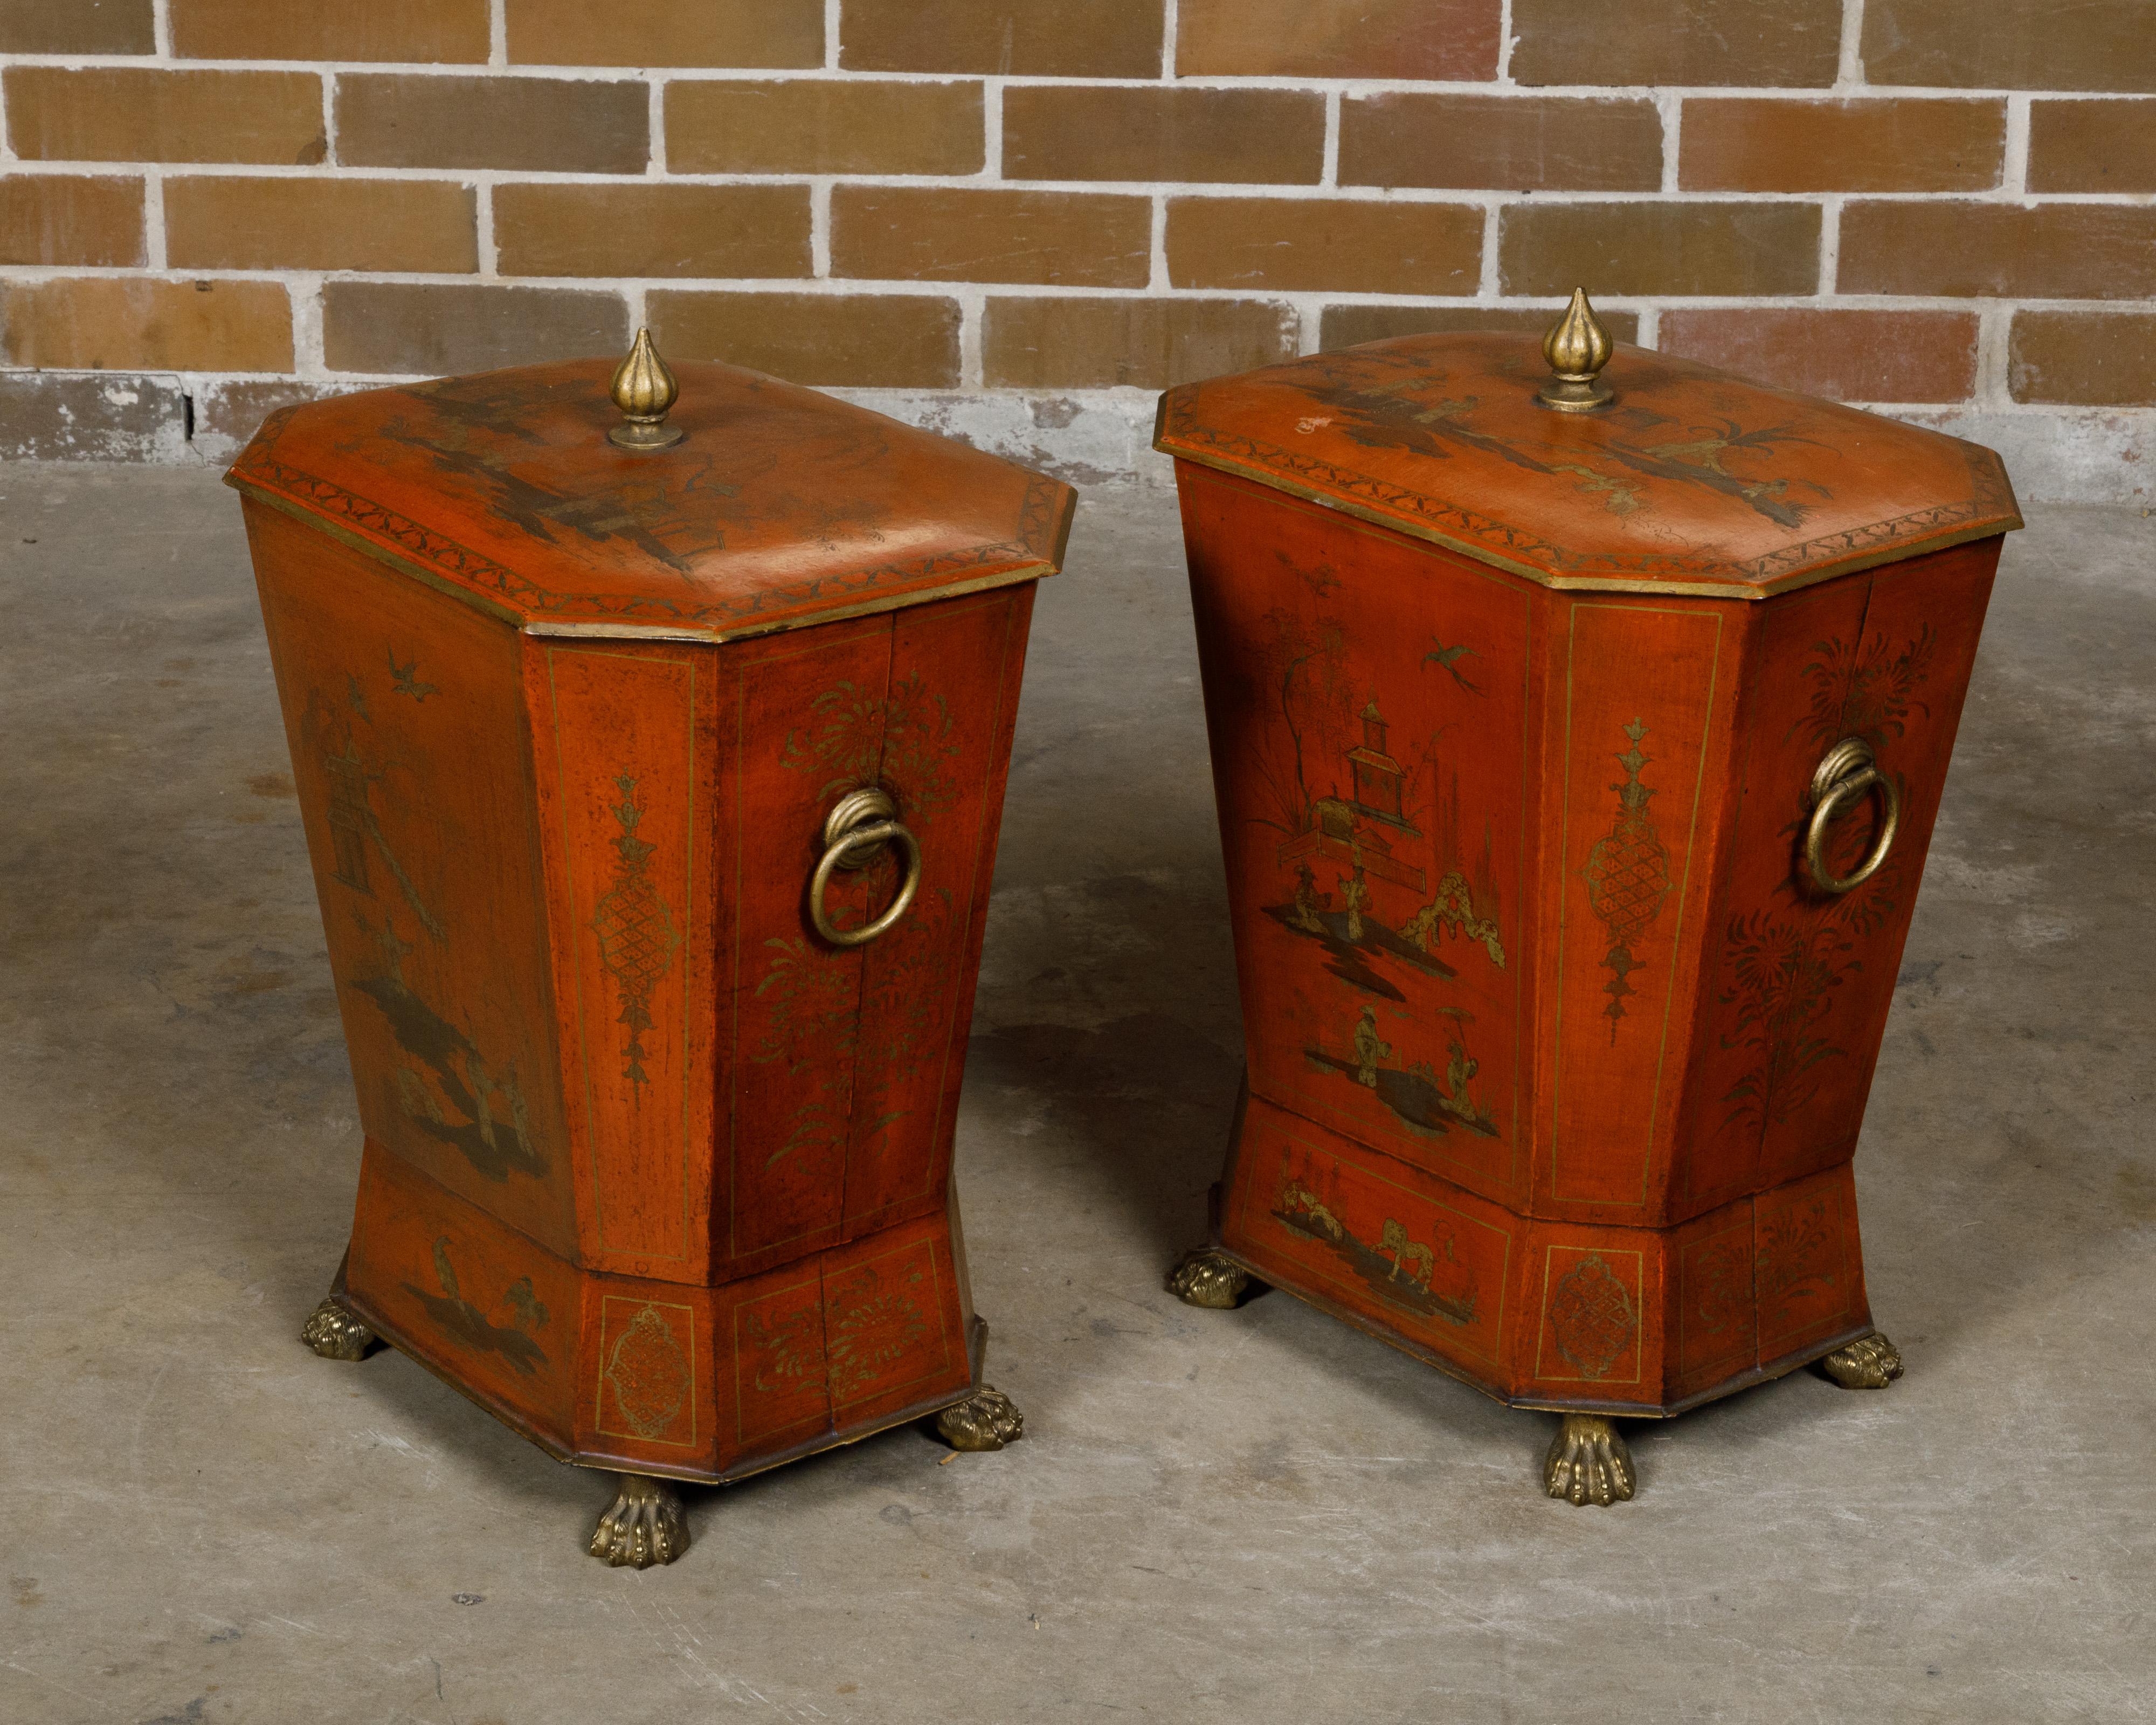 Pair of English Victorian 19th Century Red Lacquer Cellarettes with Chinoiseries For Sale 5